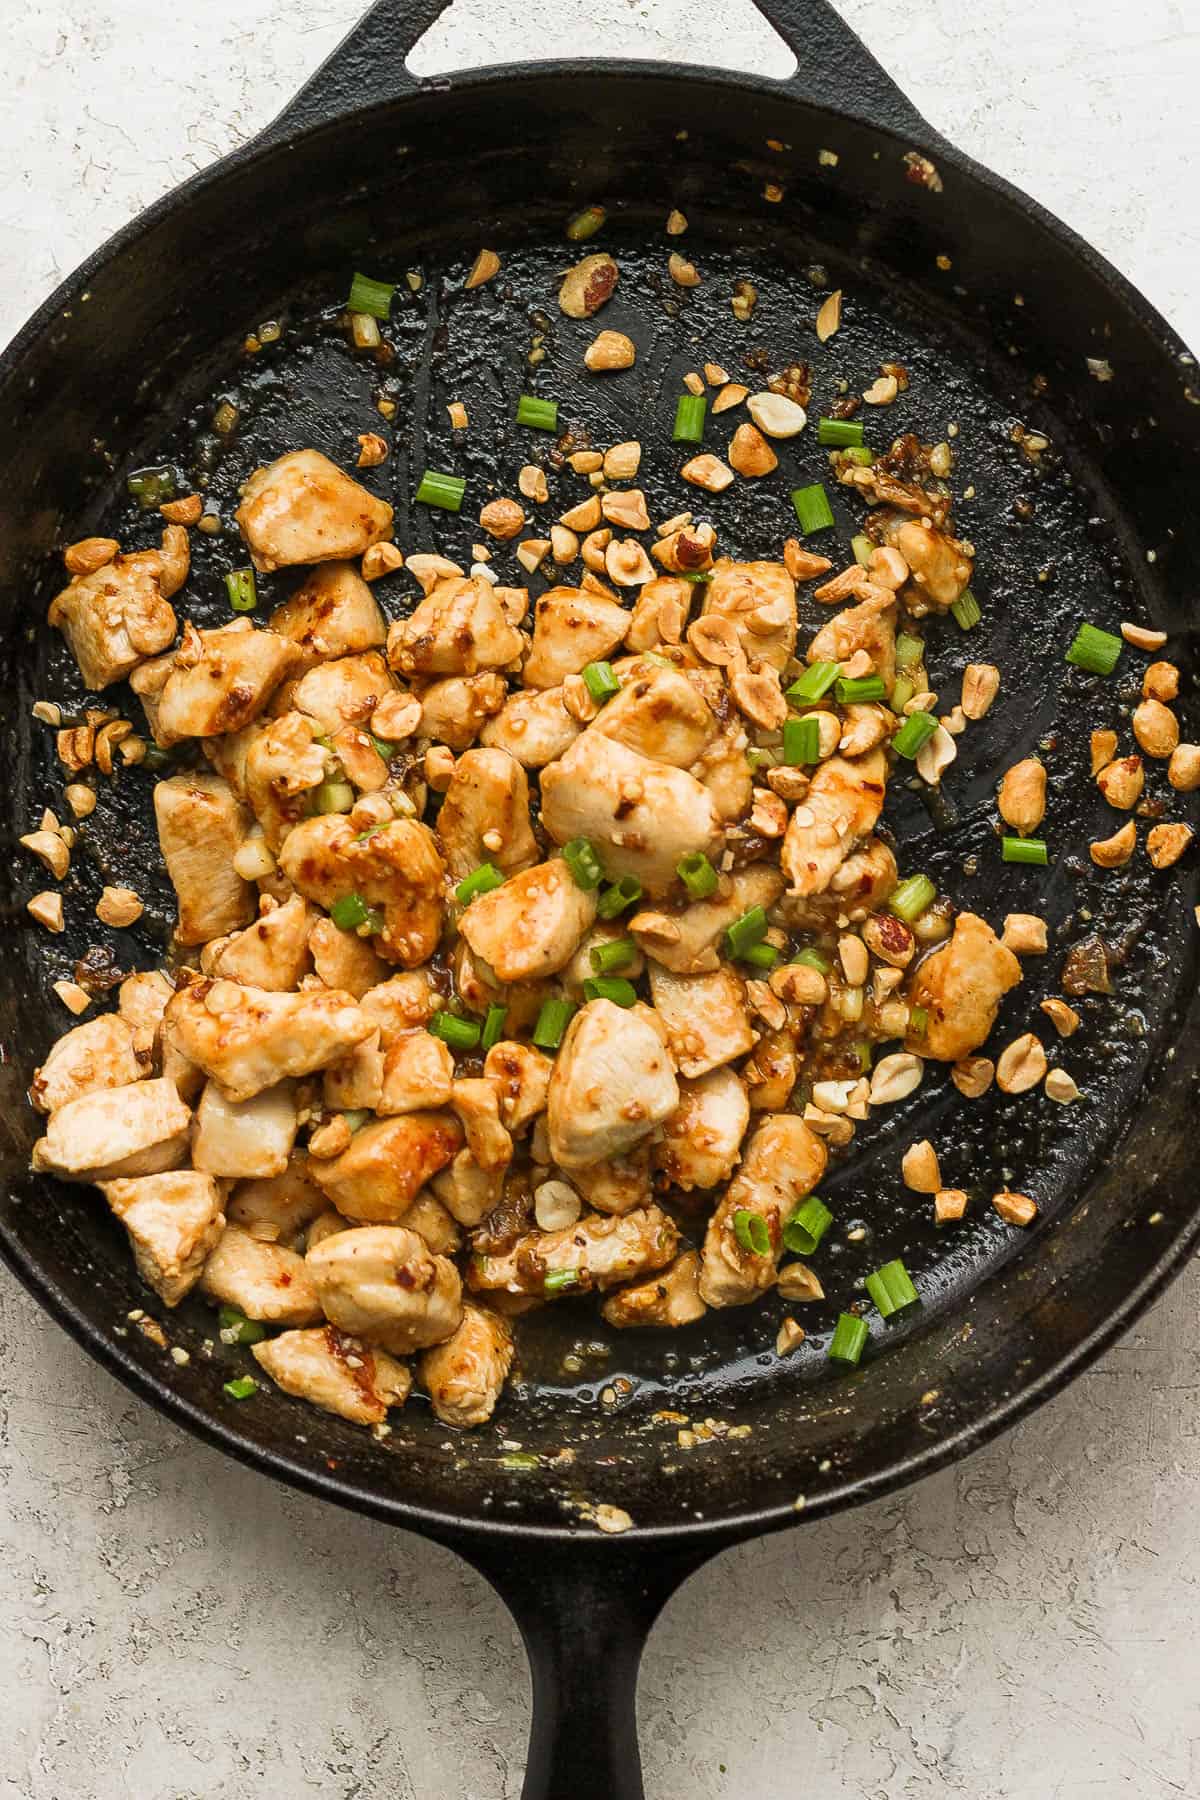 Sauce, peanuts, and sesame oil added to the pan.